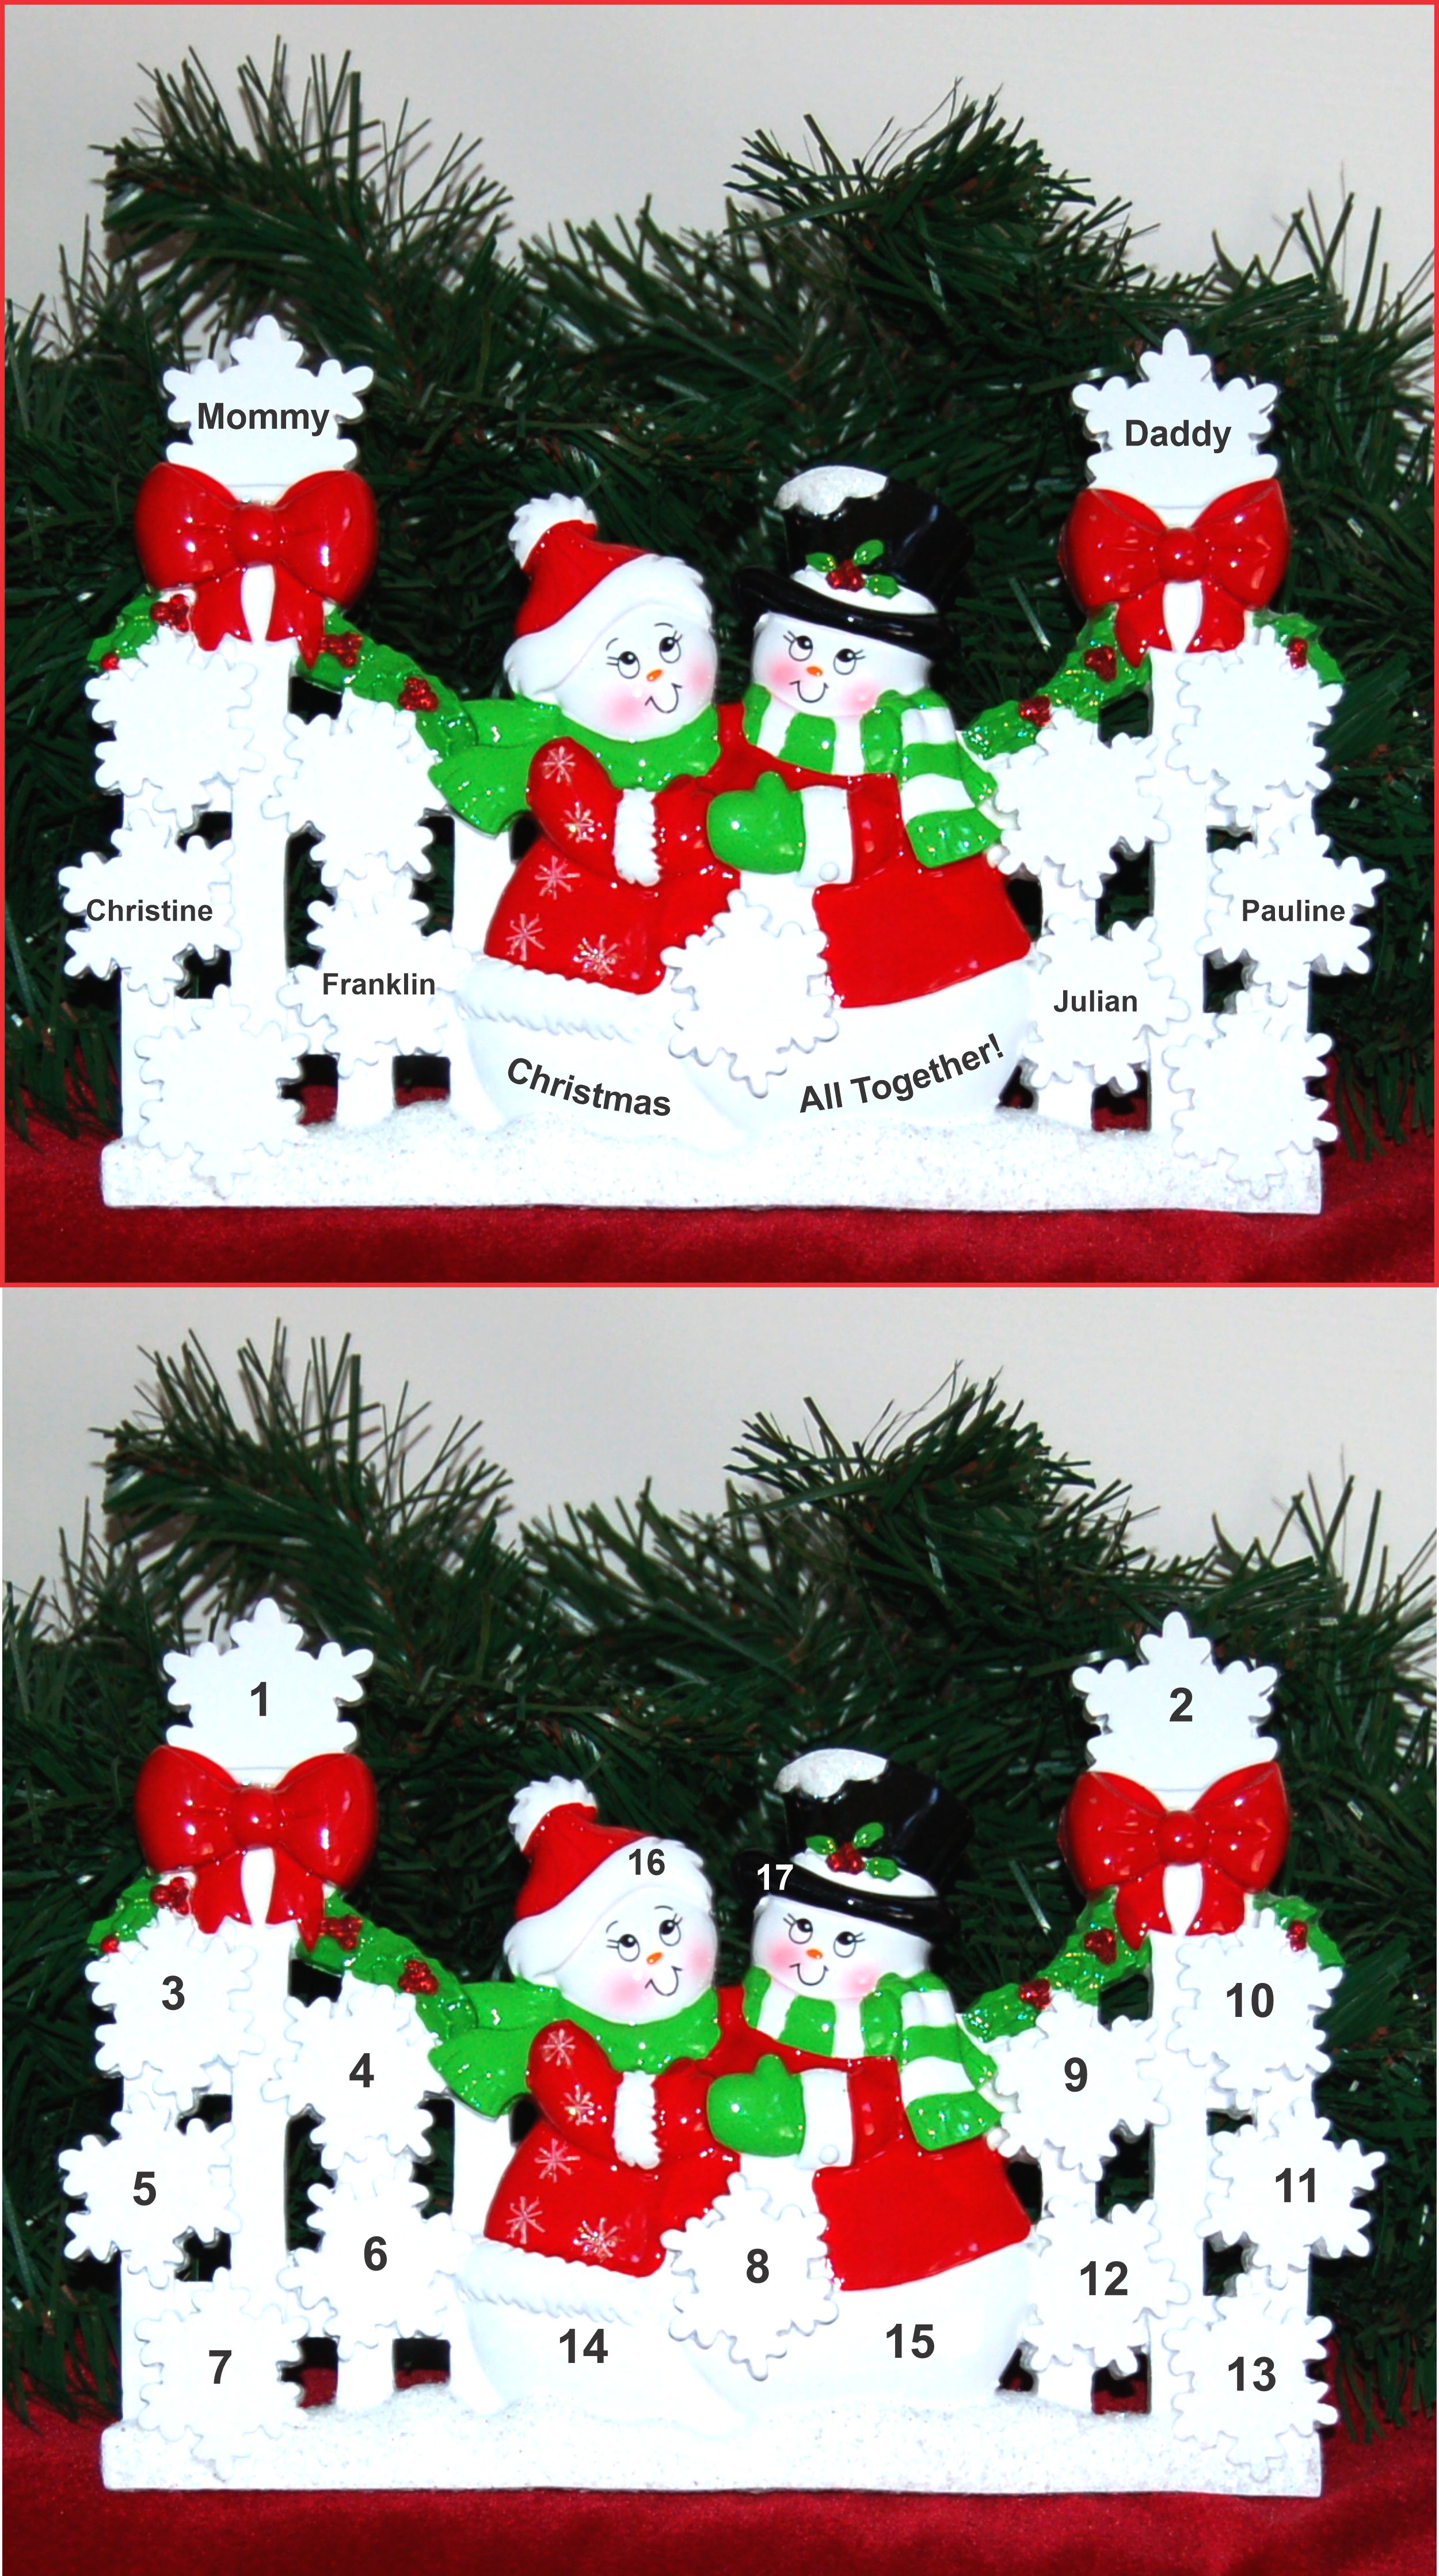 Tabletop Christmas Decoration Snowflakes Family of 6 Personalized by RussellRhodes.com